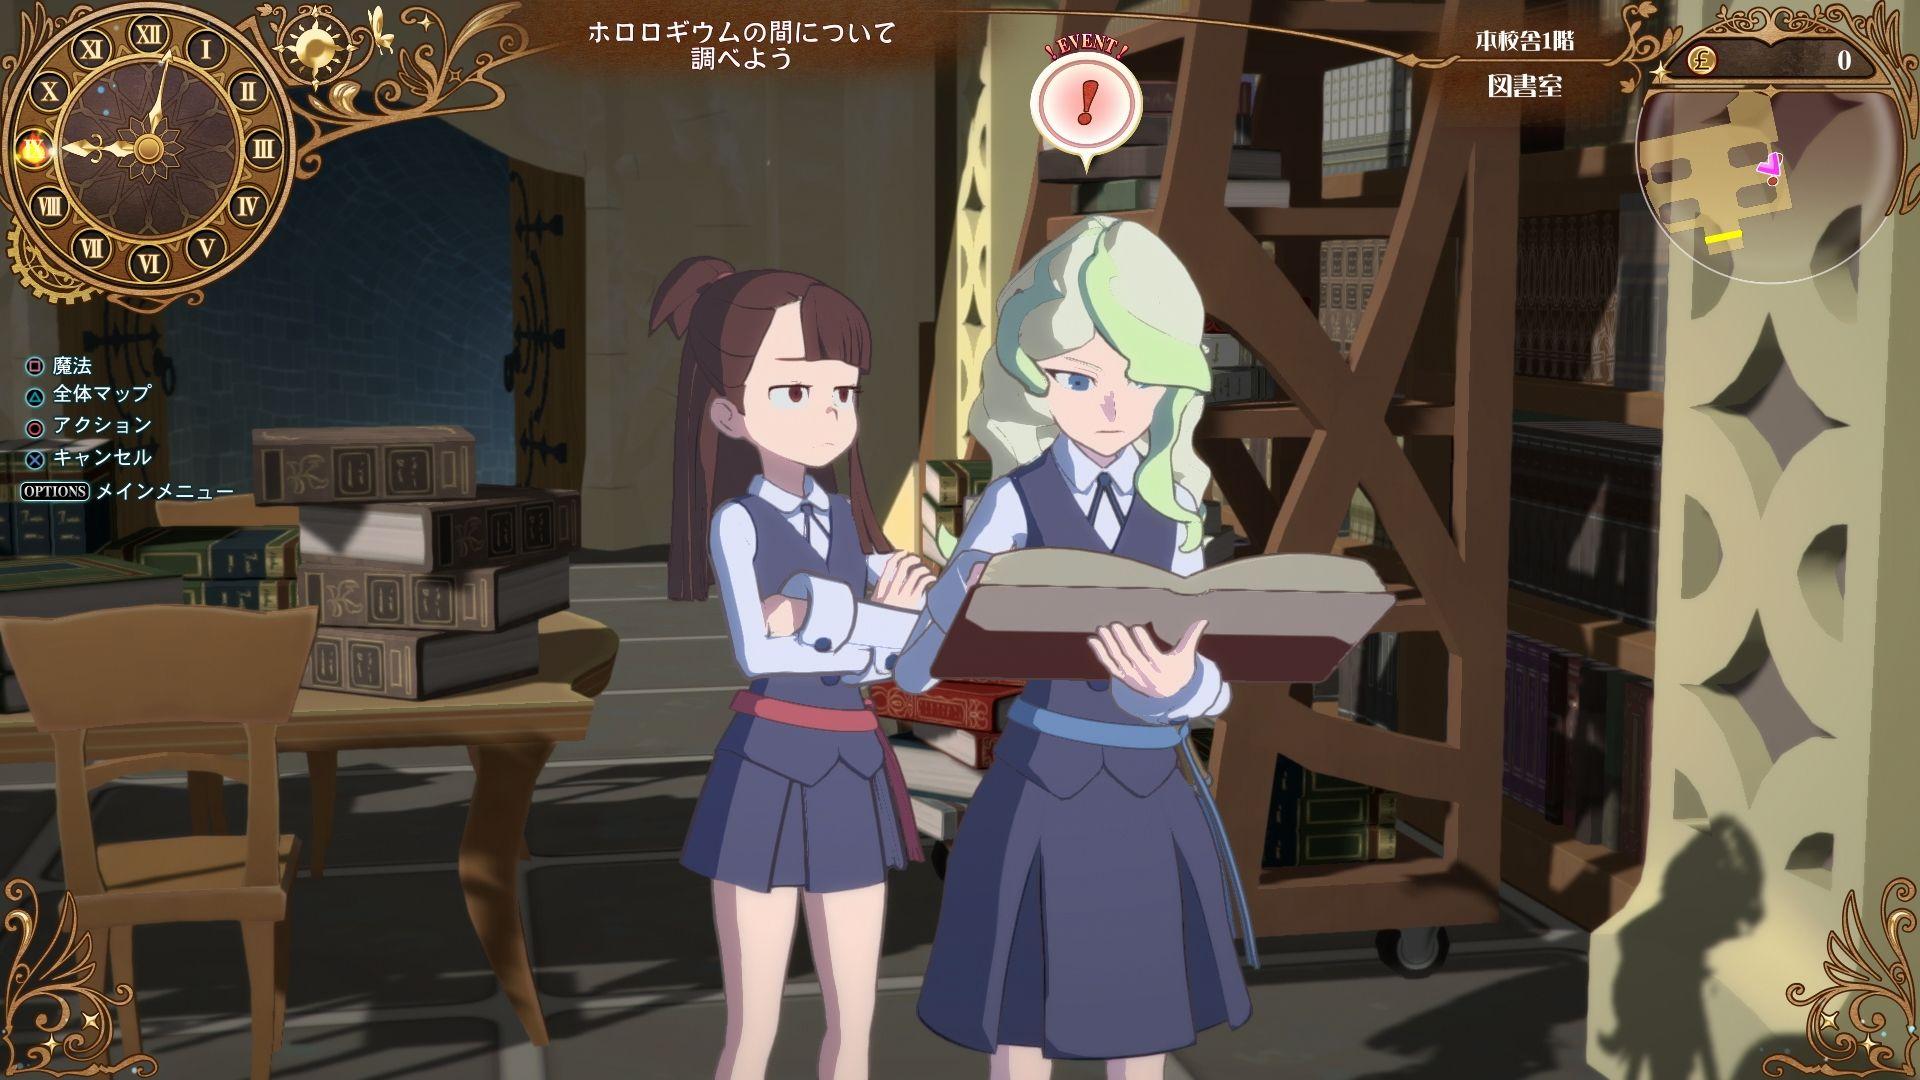 Little Witch Academia Gets Screenshots Featuring Characters and More